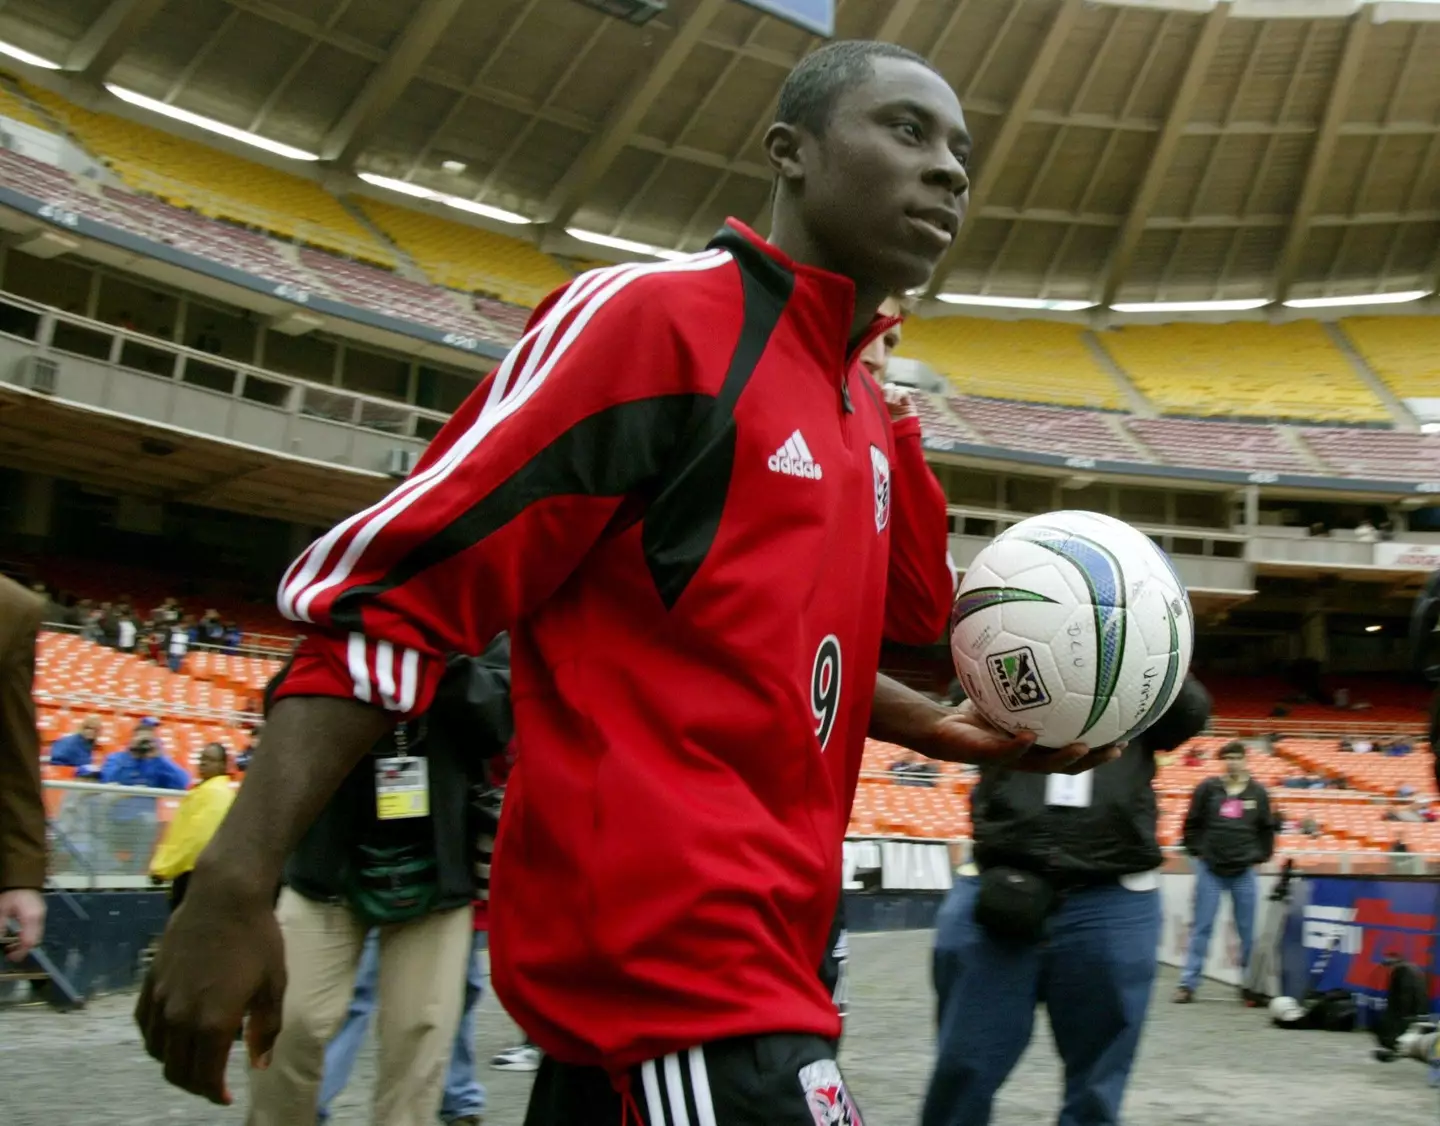 A 14-year-old Freddy Adu gets ready to warm up ahead of his first professional game. He was "very nervous". Image credit: Alamy